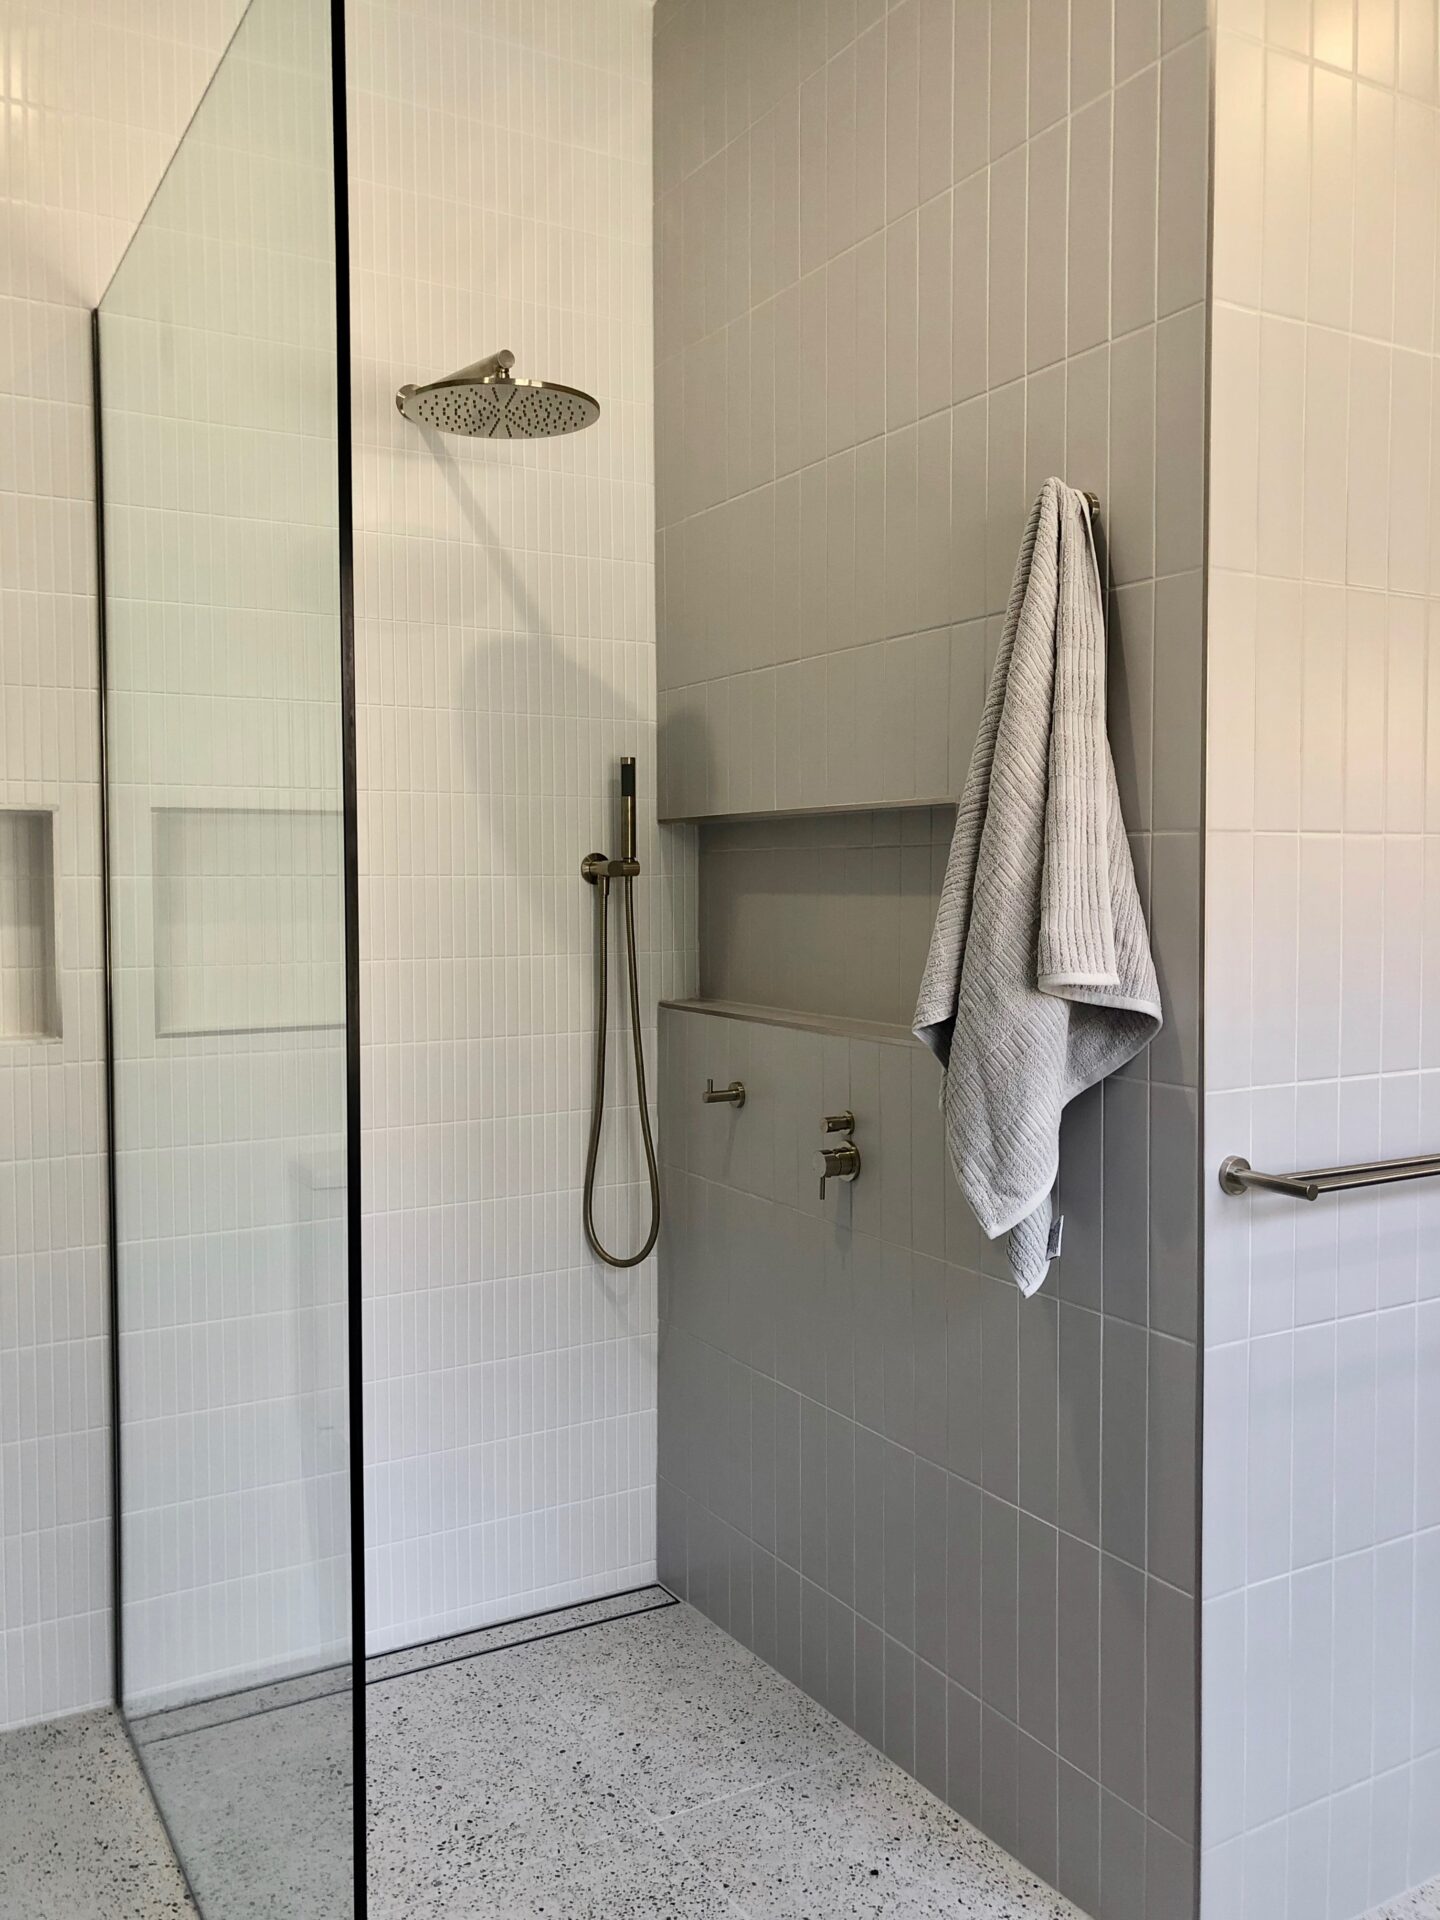 modern bathroom with gray wall tiles, shower area and a towel hanging at the wall